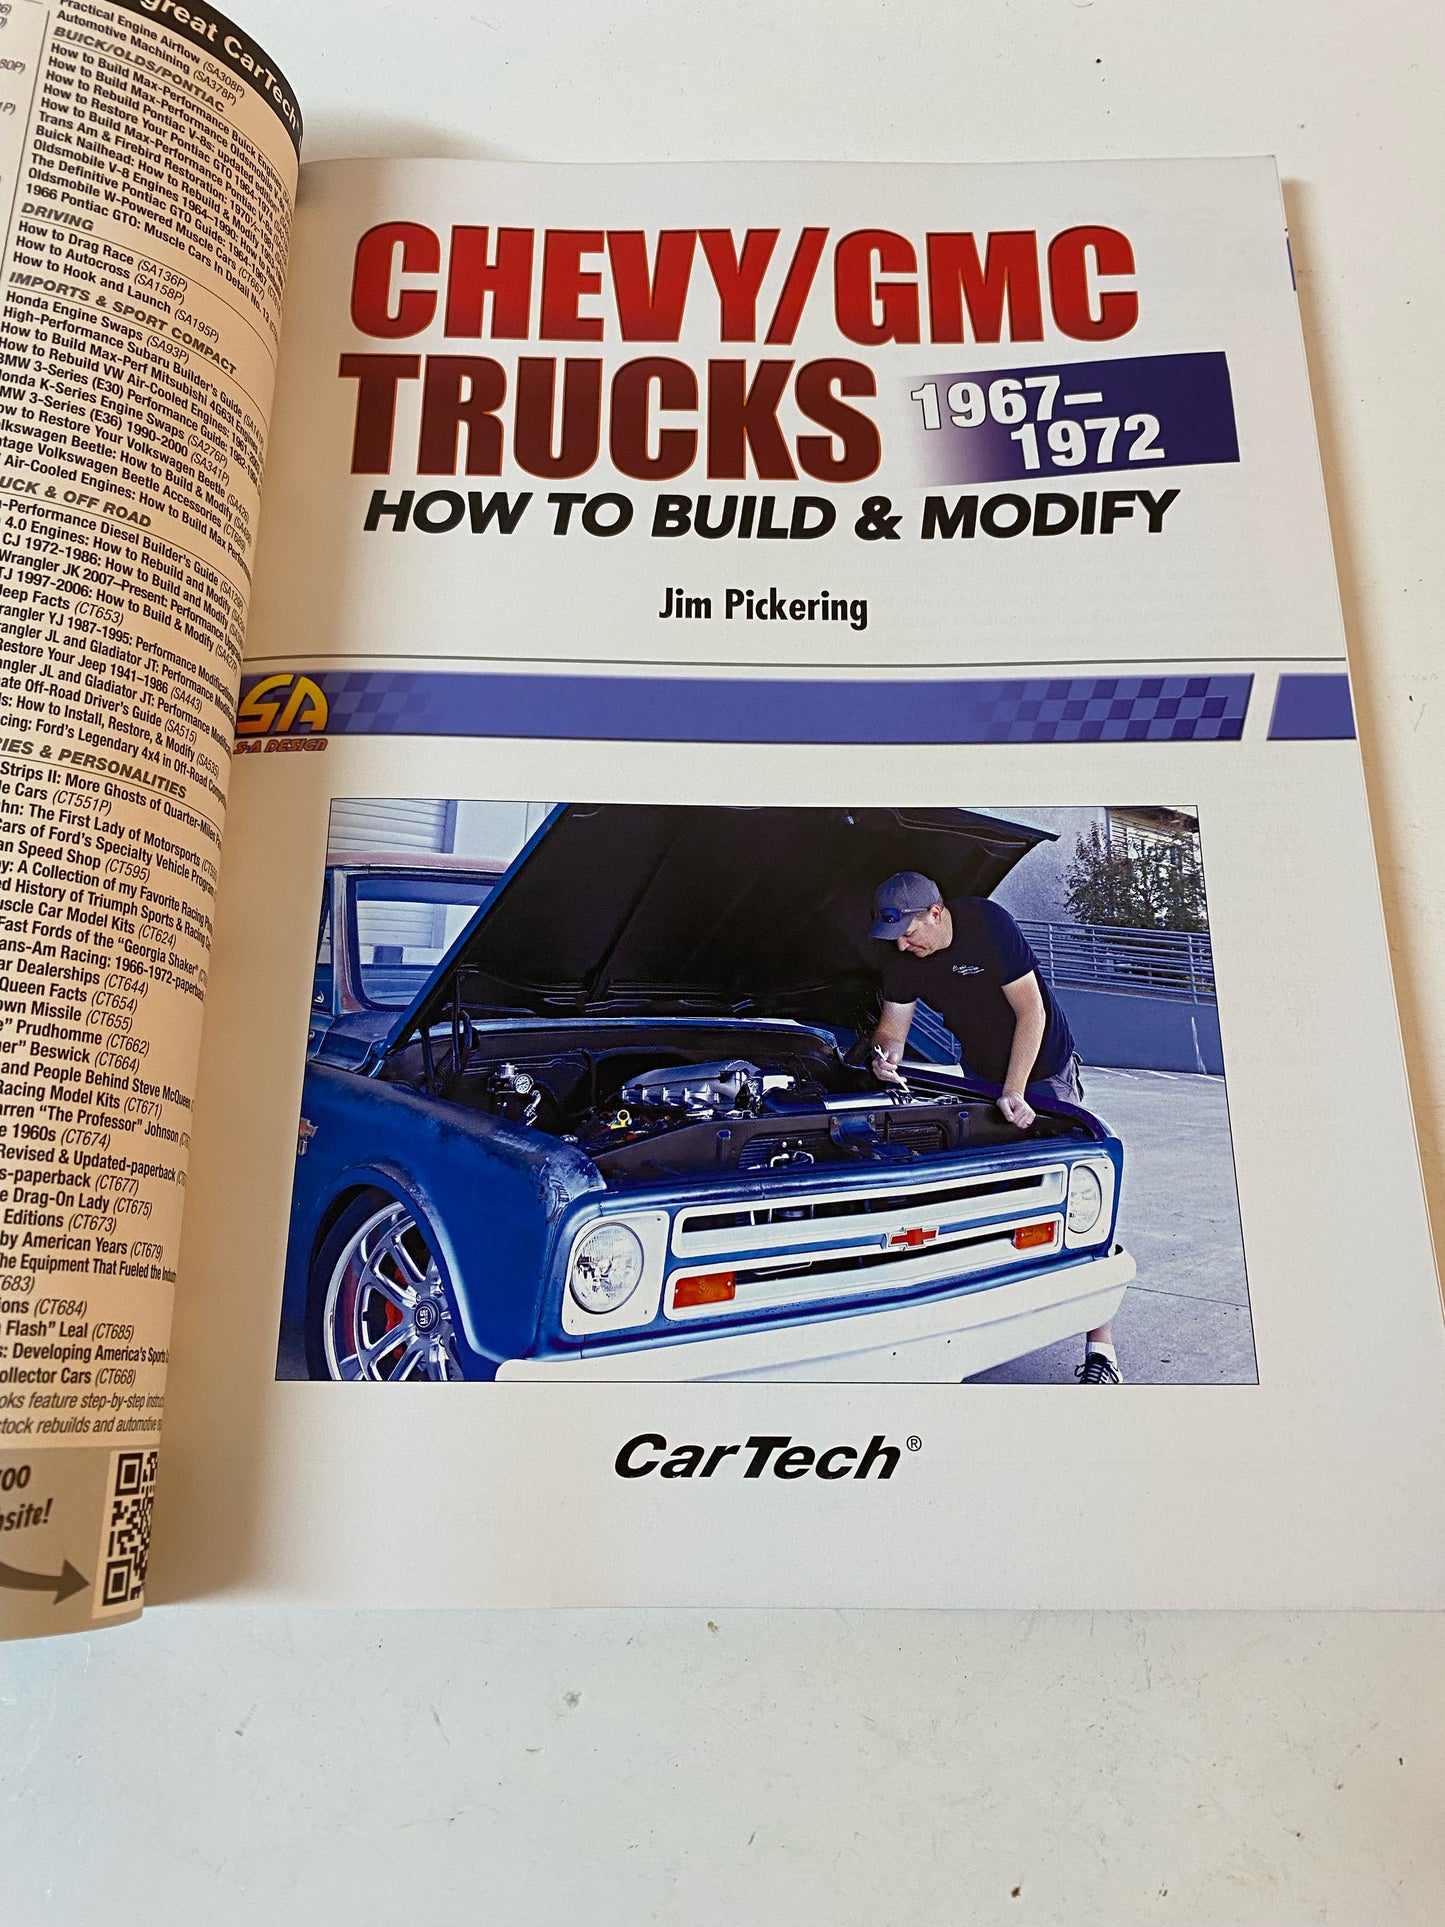 How to Build and Modify Chevy GMC Trucks 1967-1972 Book